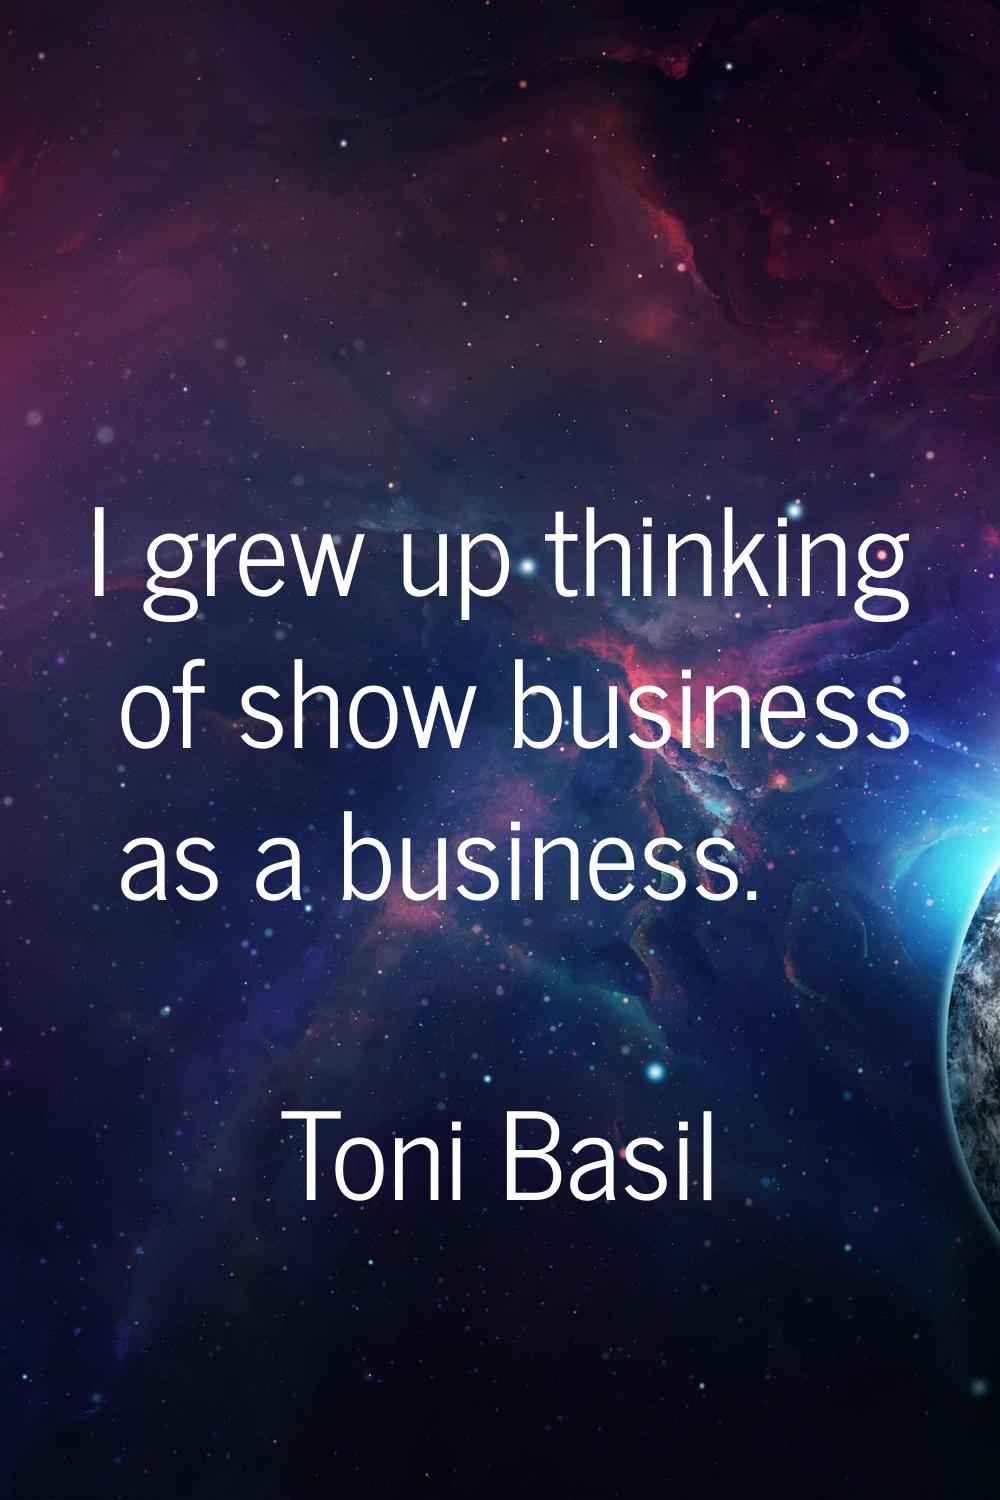 I grew up thinking of show business as a business.